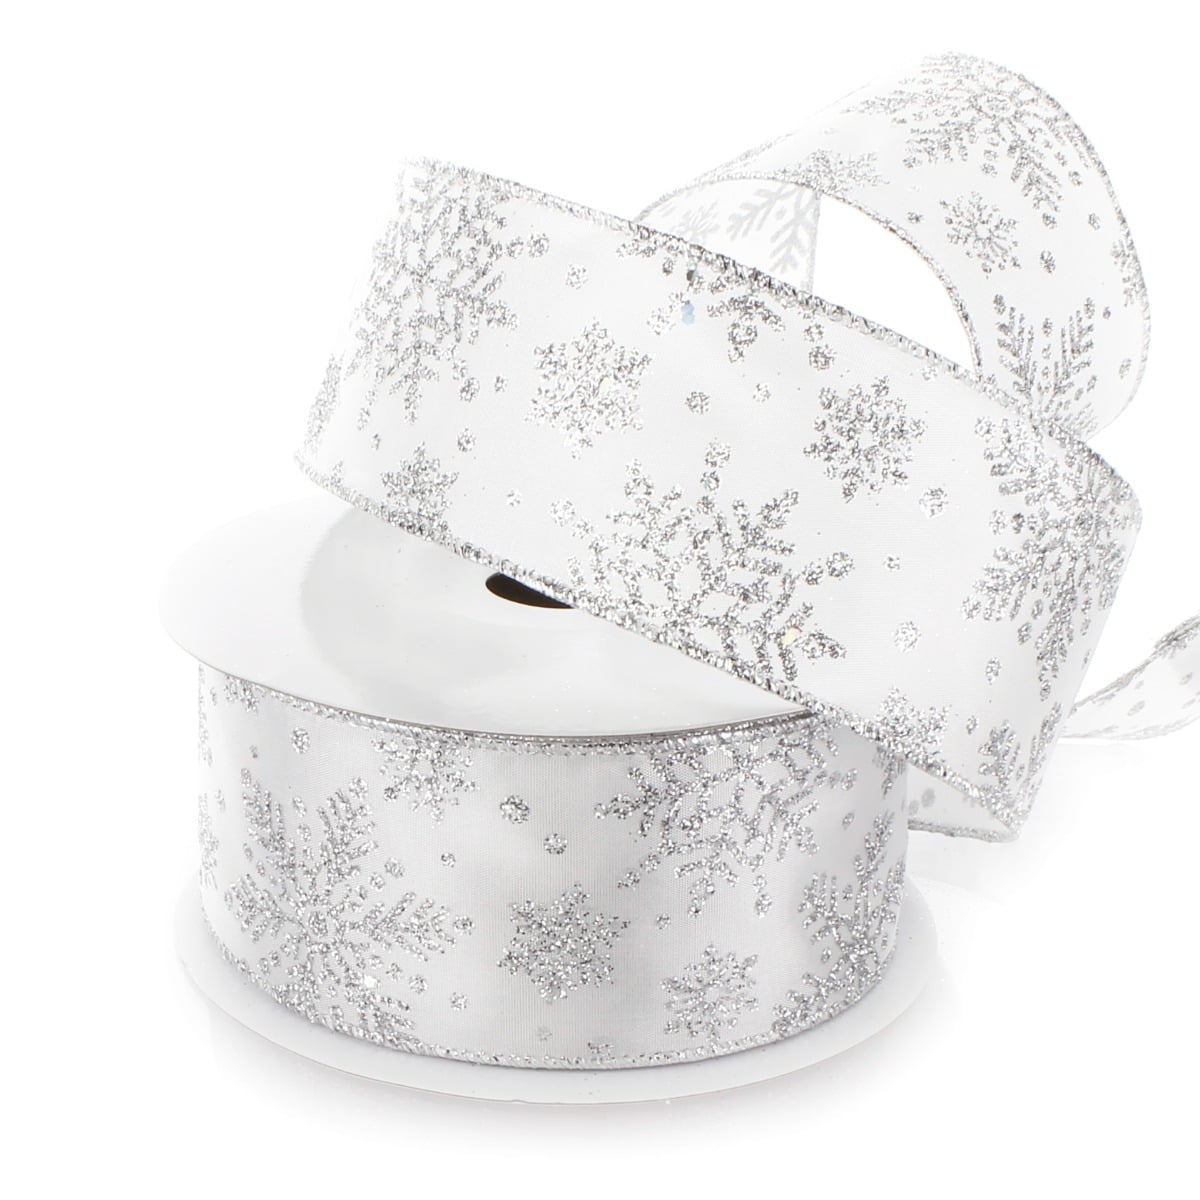 Shop Exclusive White/Silver 1 1/2 inch x 25 Yards Sheer Ribbon